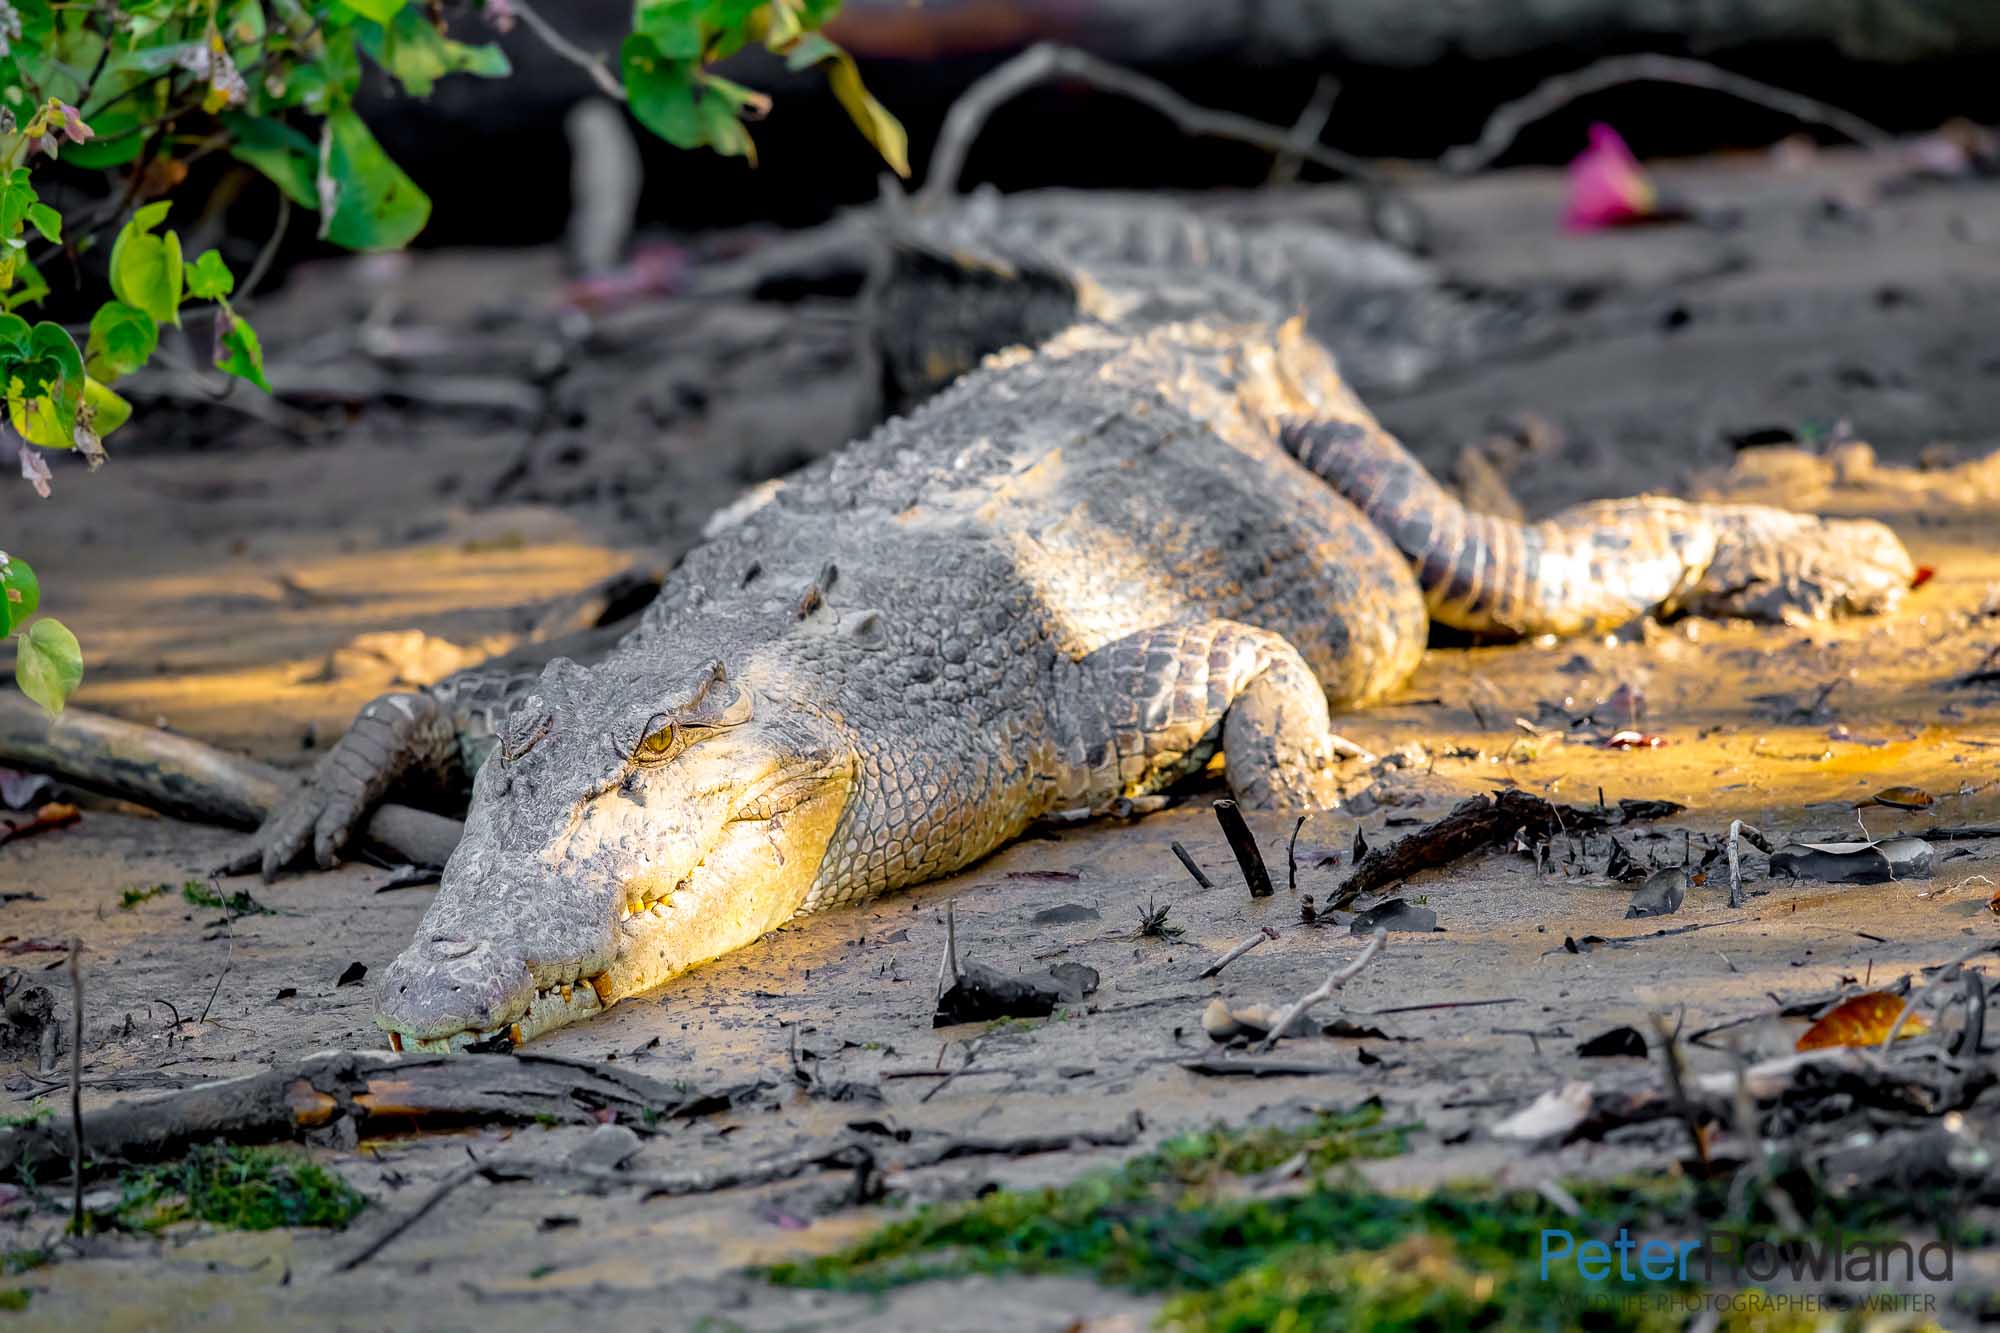 A female Saltwater or Estuarine Crocodile on a muddy bank in the mangroves